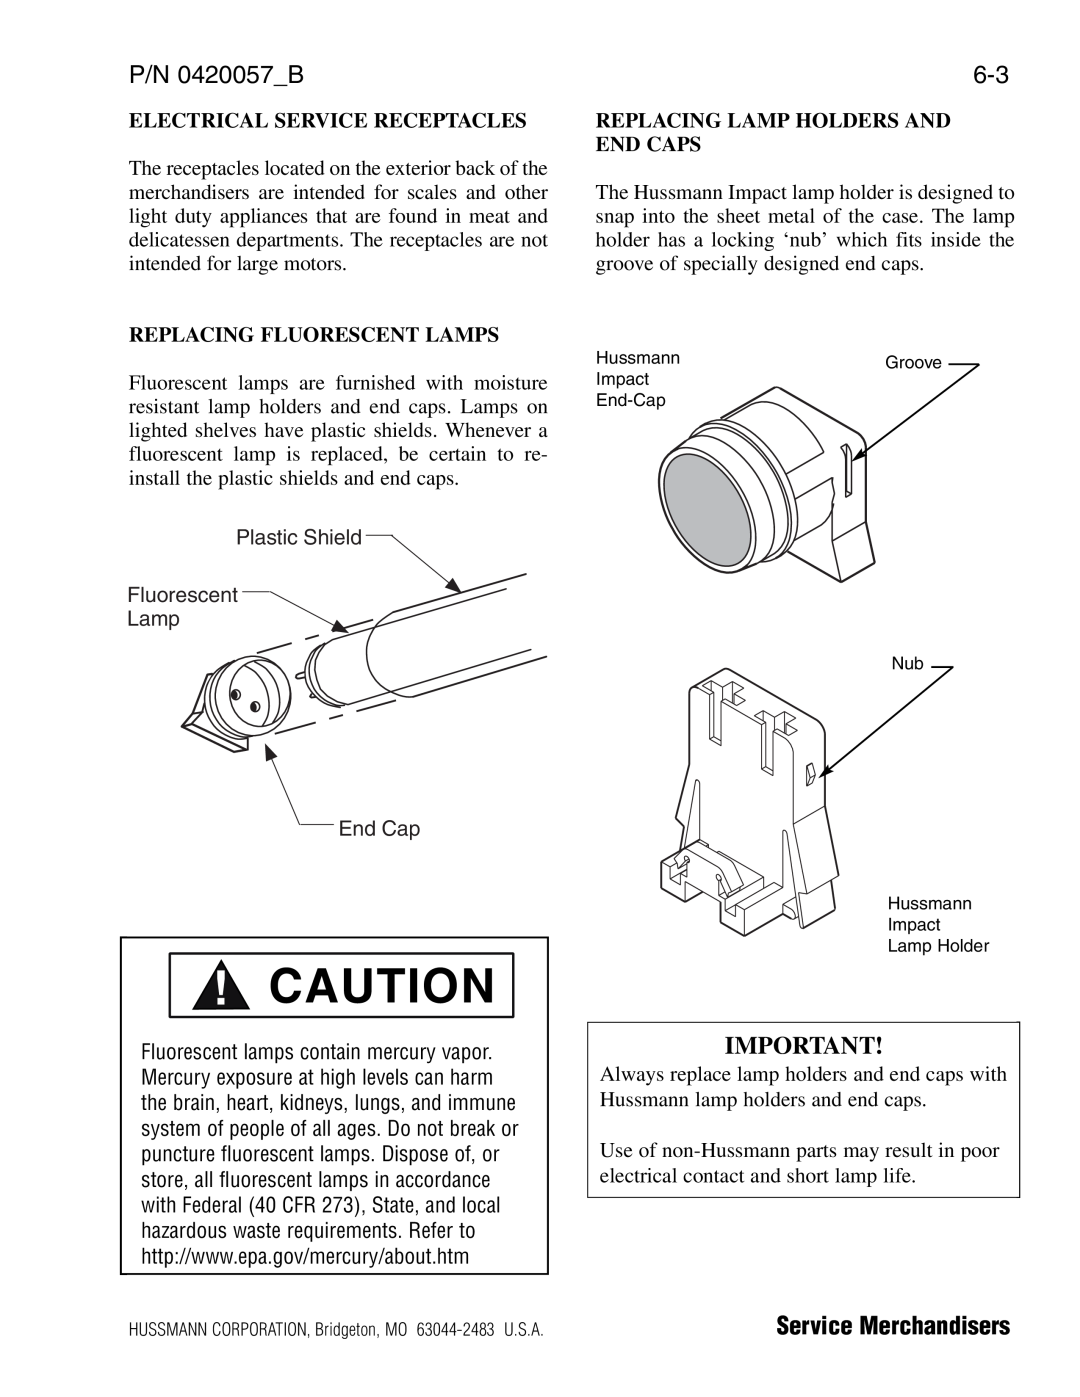 hussman P/N 0420057_B operation manual P/N 0420057B, Electrical Service Receptacles, Replacing Fluorescent Lamps 